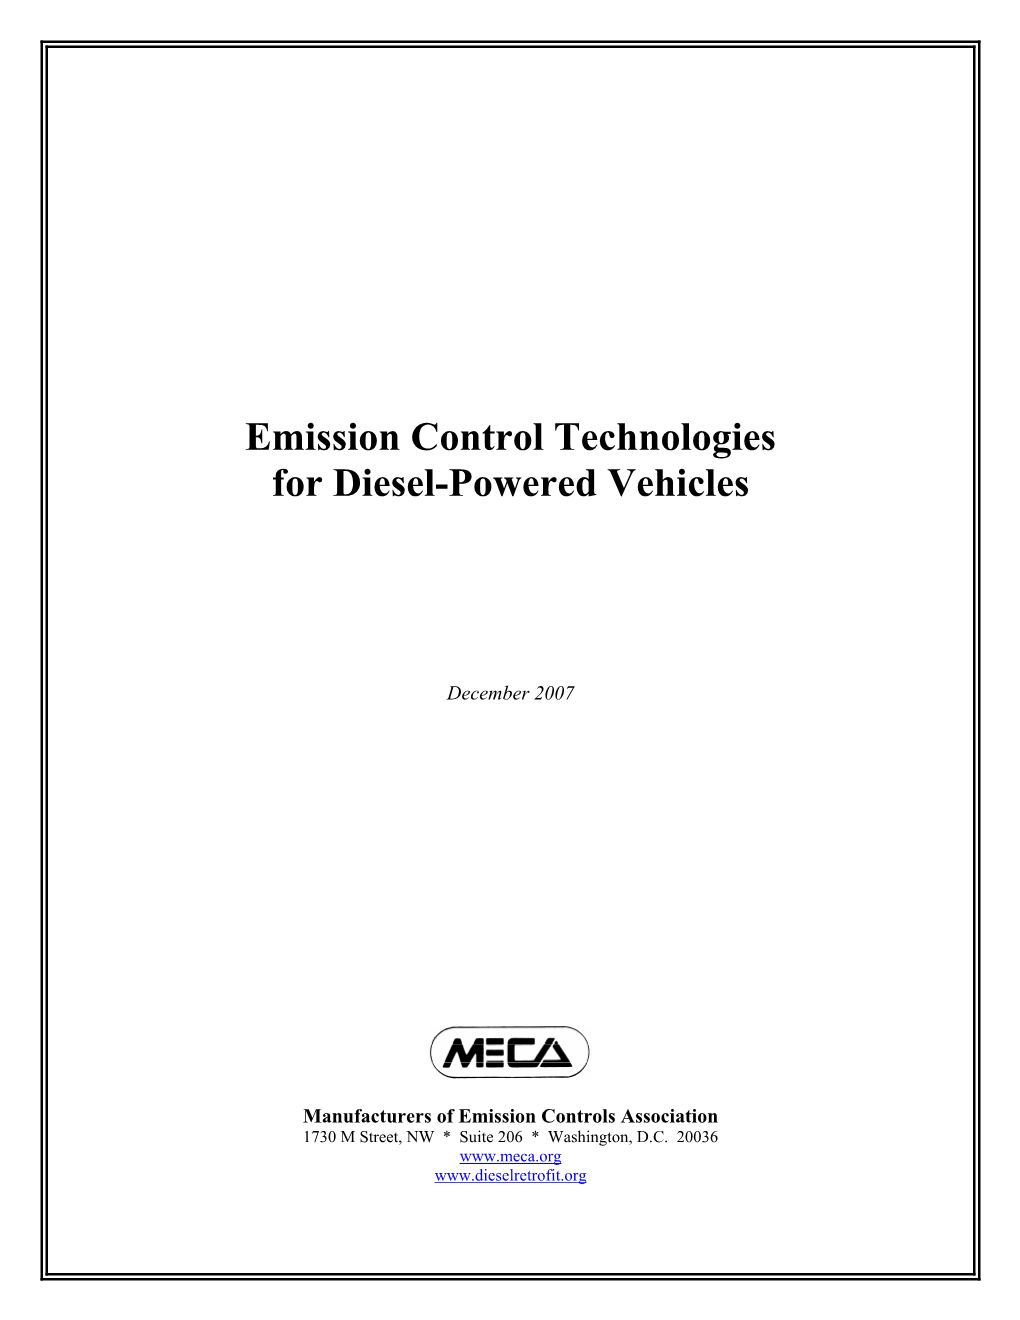 Emission Control Technologies for Diesel-Powered Vehicles